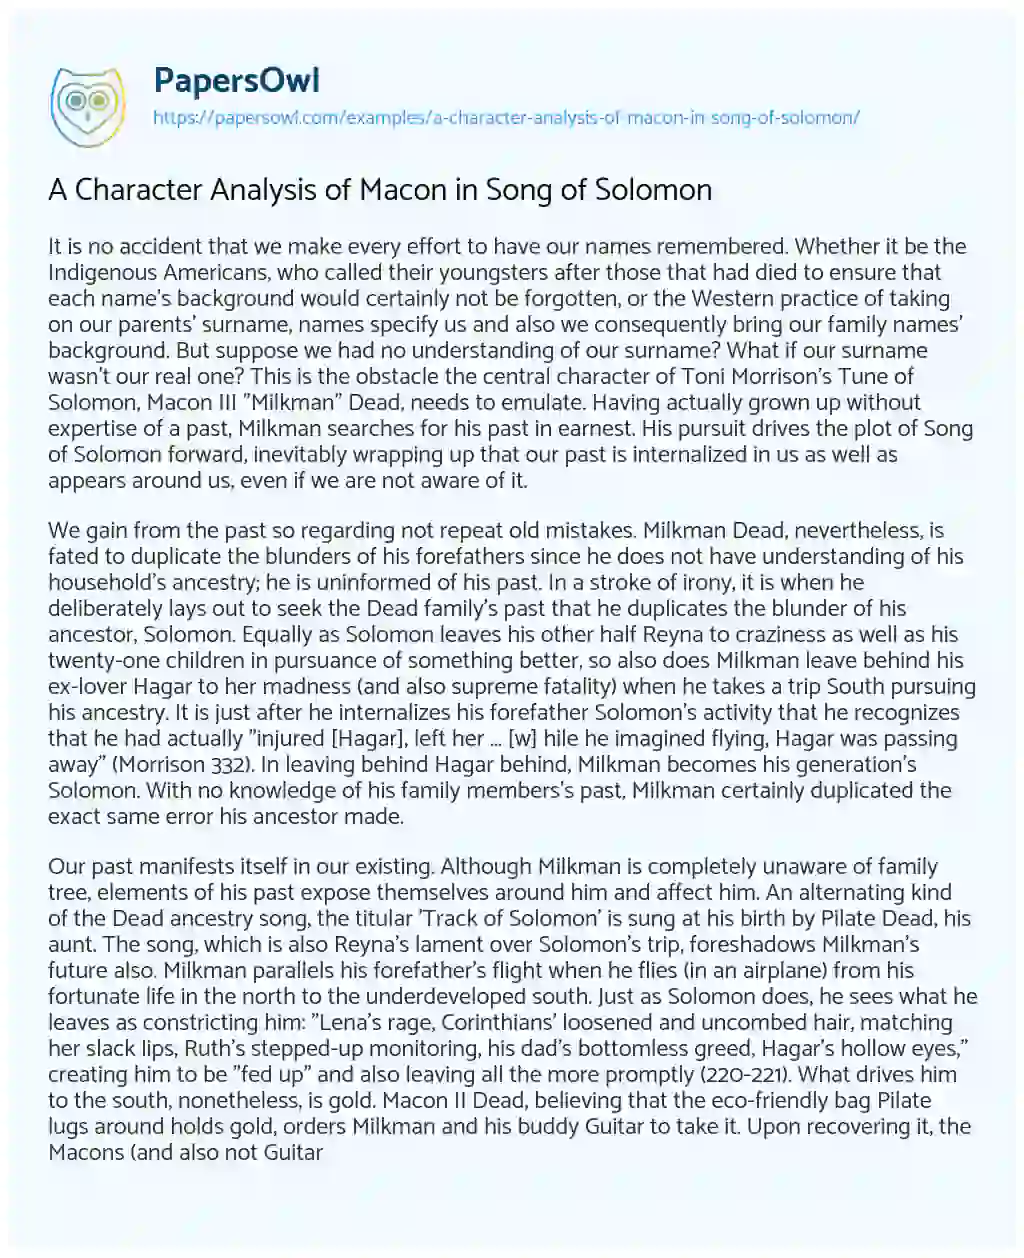 Essay on A Character Analysis of Macon in Song of Solomon